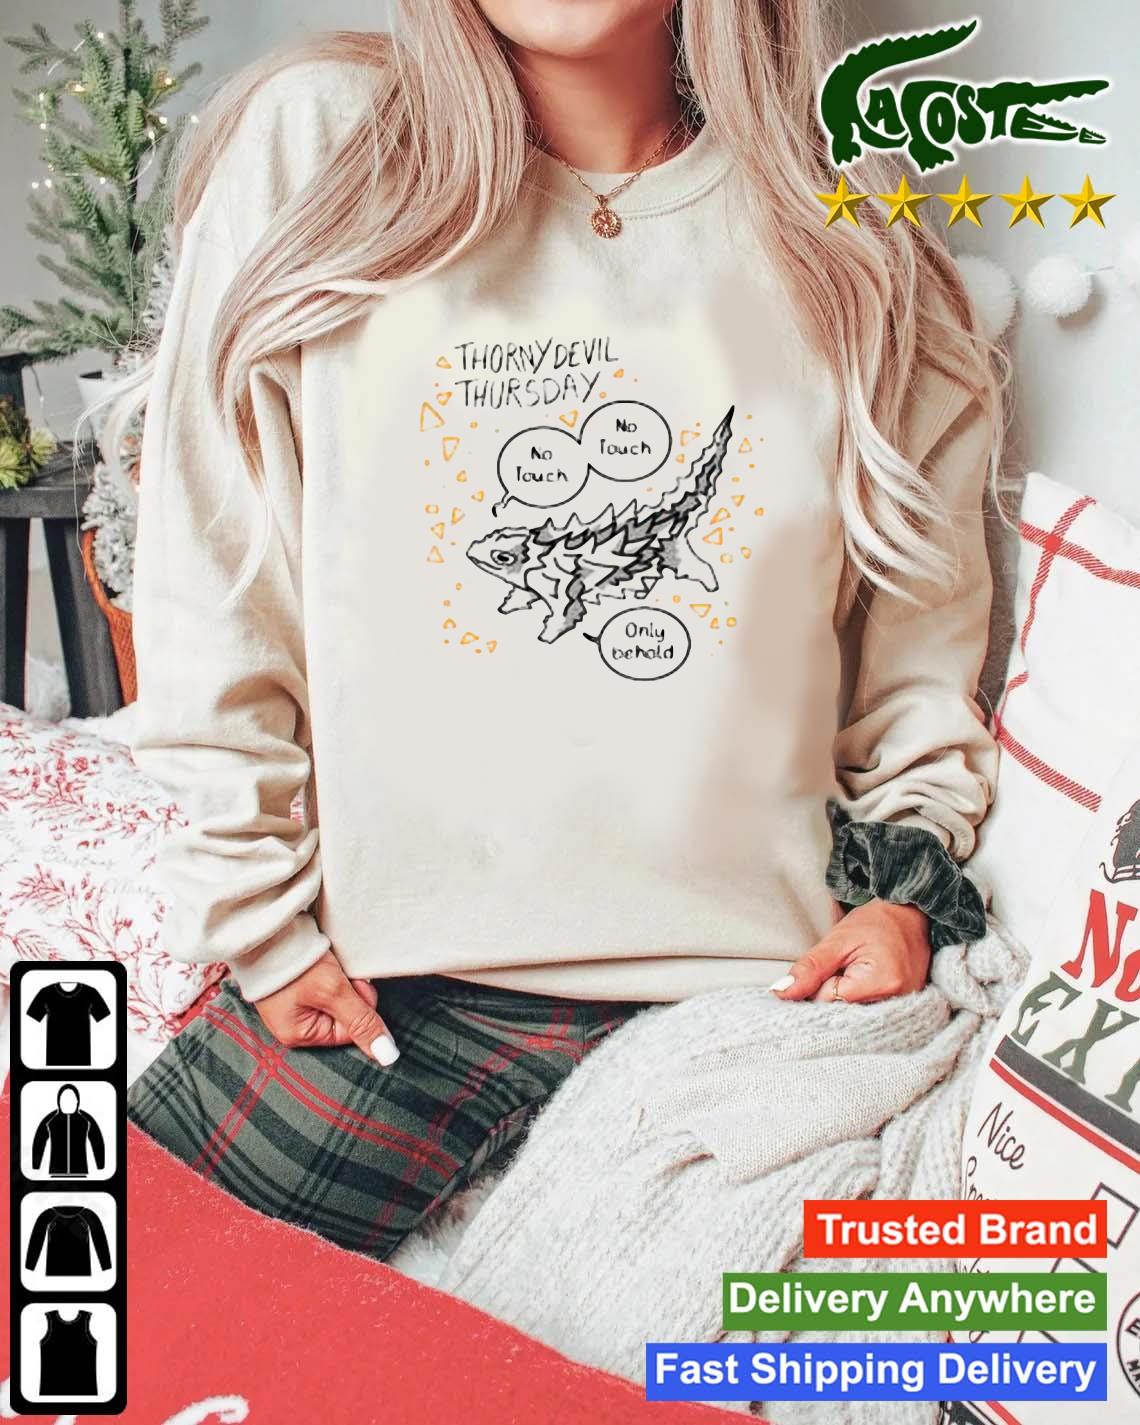 Thorny Devil Thursday No Touch Only Behold Sweats Mockup Sweater